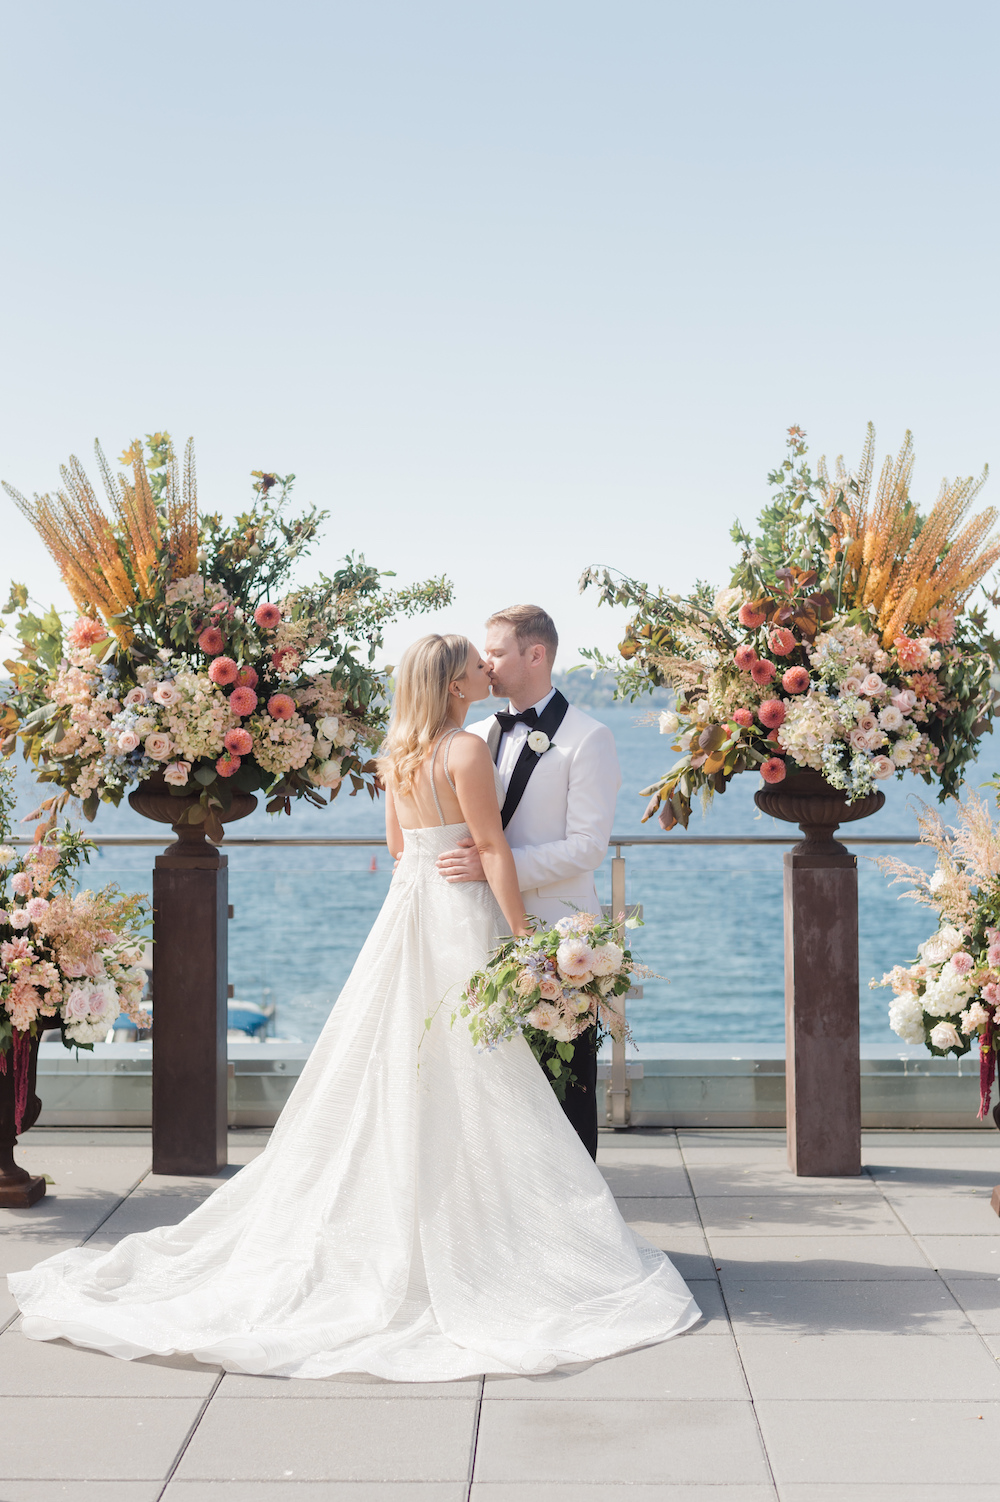 Bride and groom in front of their large floral ceremony backdrop for their Seattle outdoor wedding